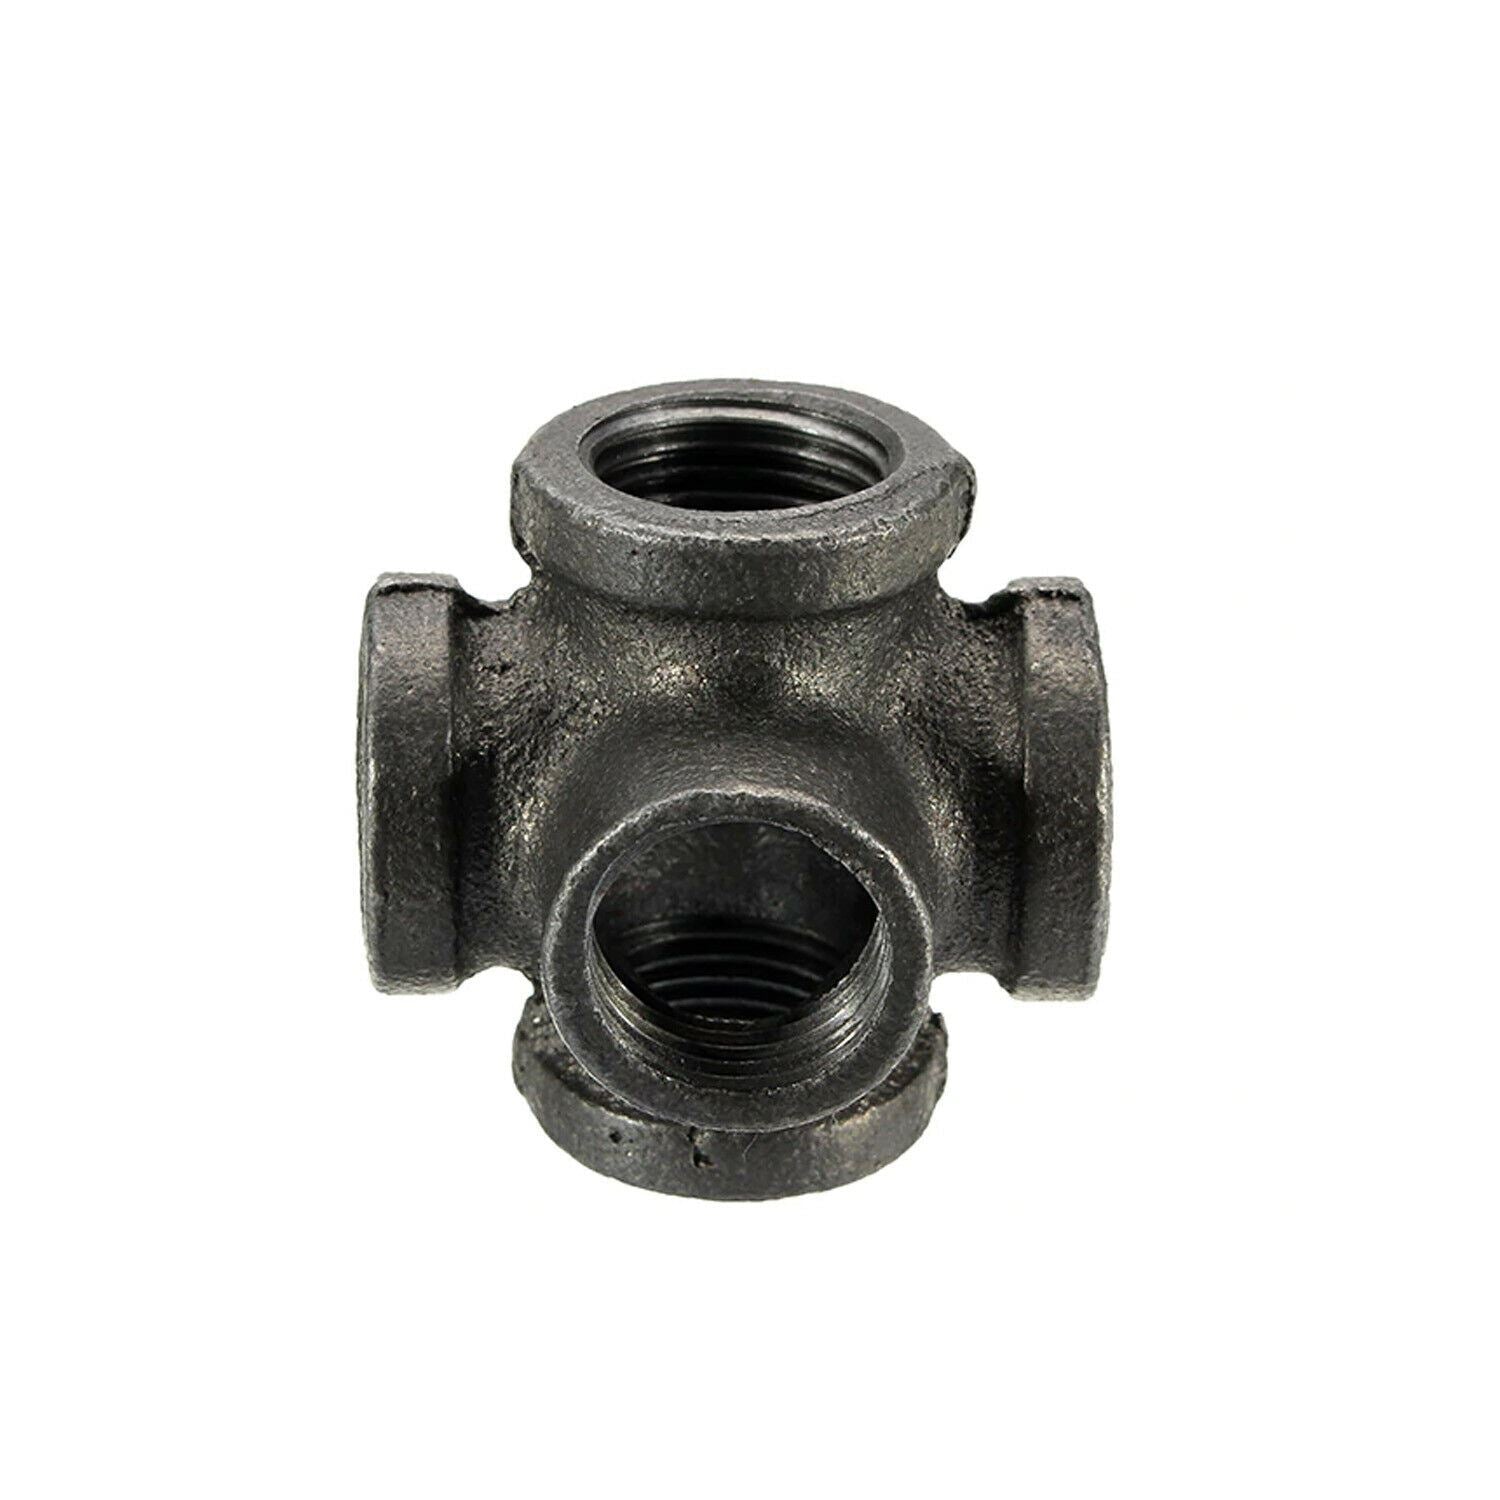 BLACK MALLEABLE IRON PIPE FITTING BSP 3/4